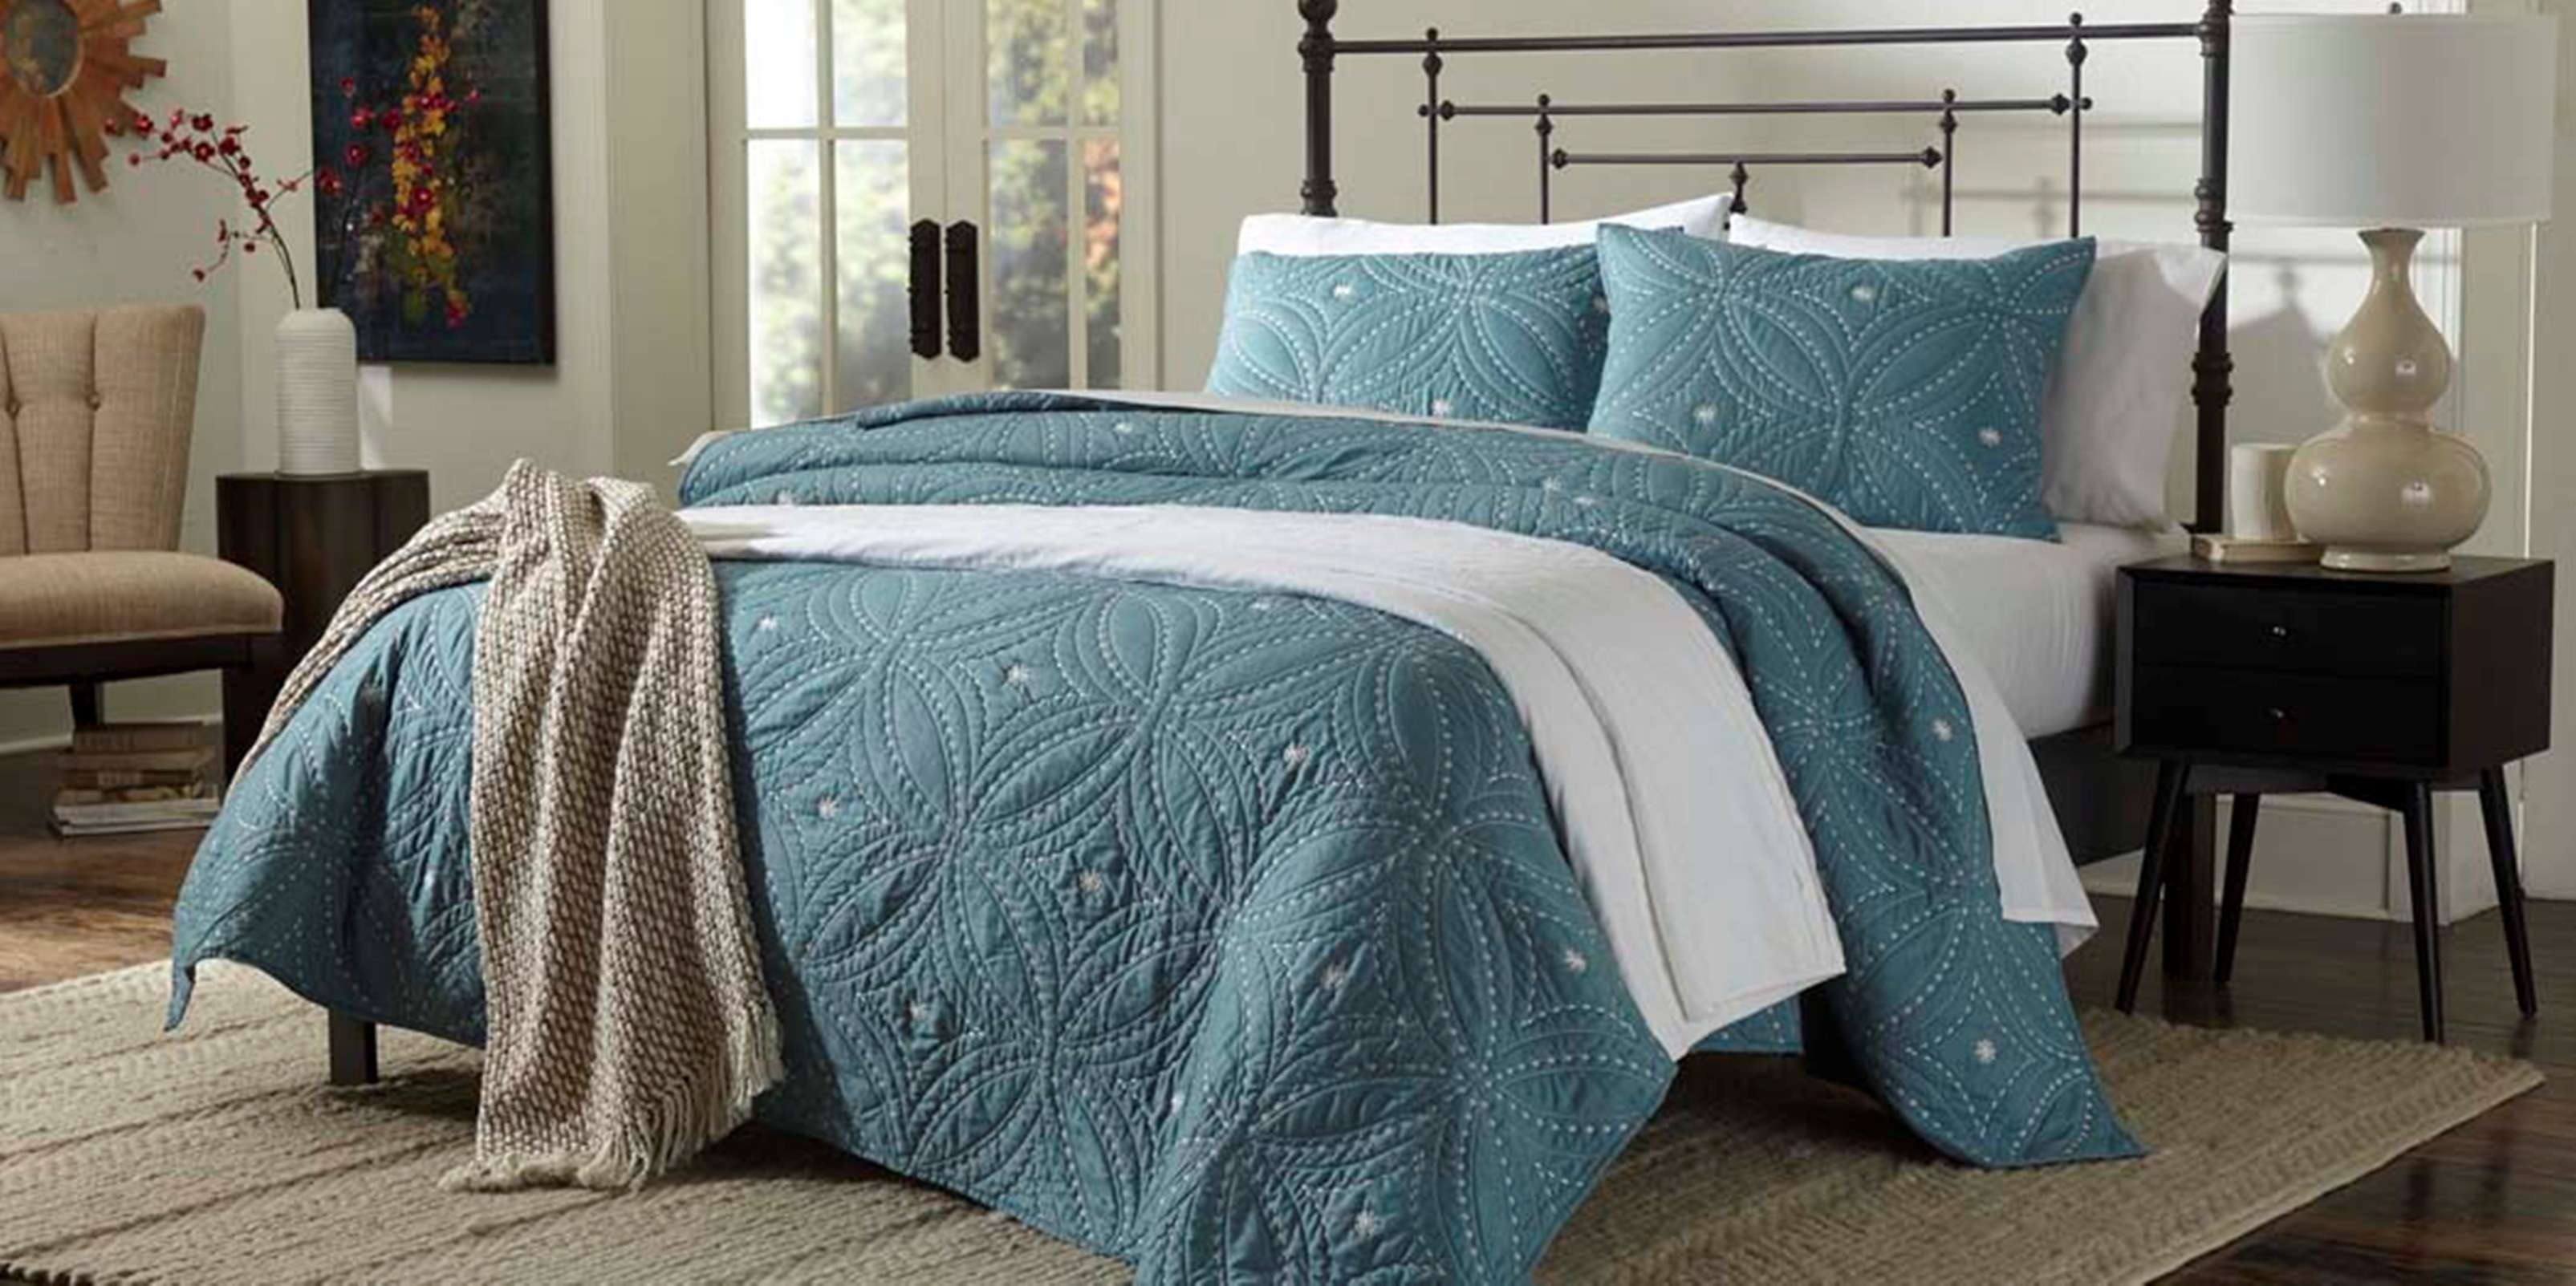 Cannon Embroidered Quilt - Teal